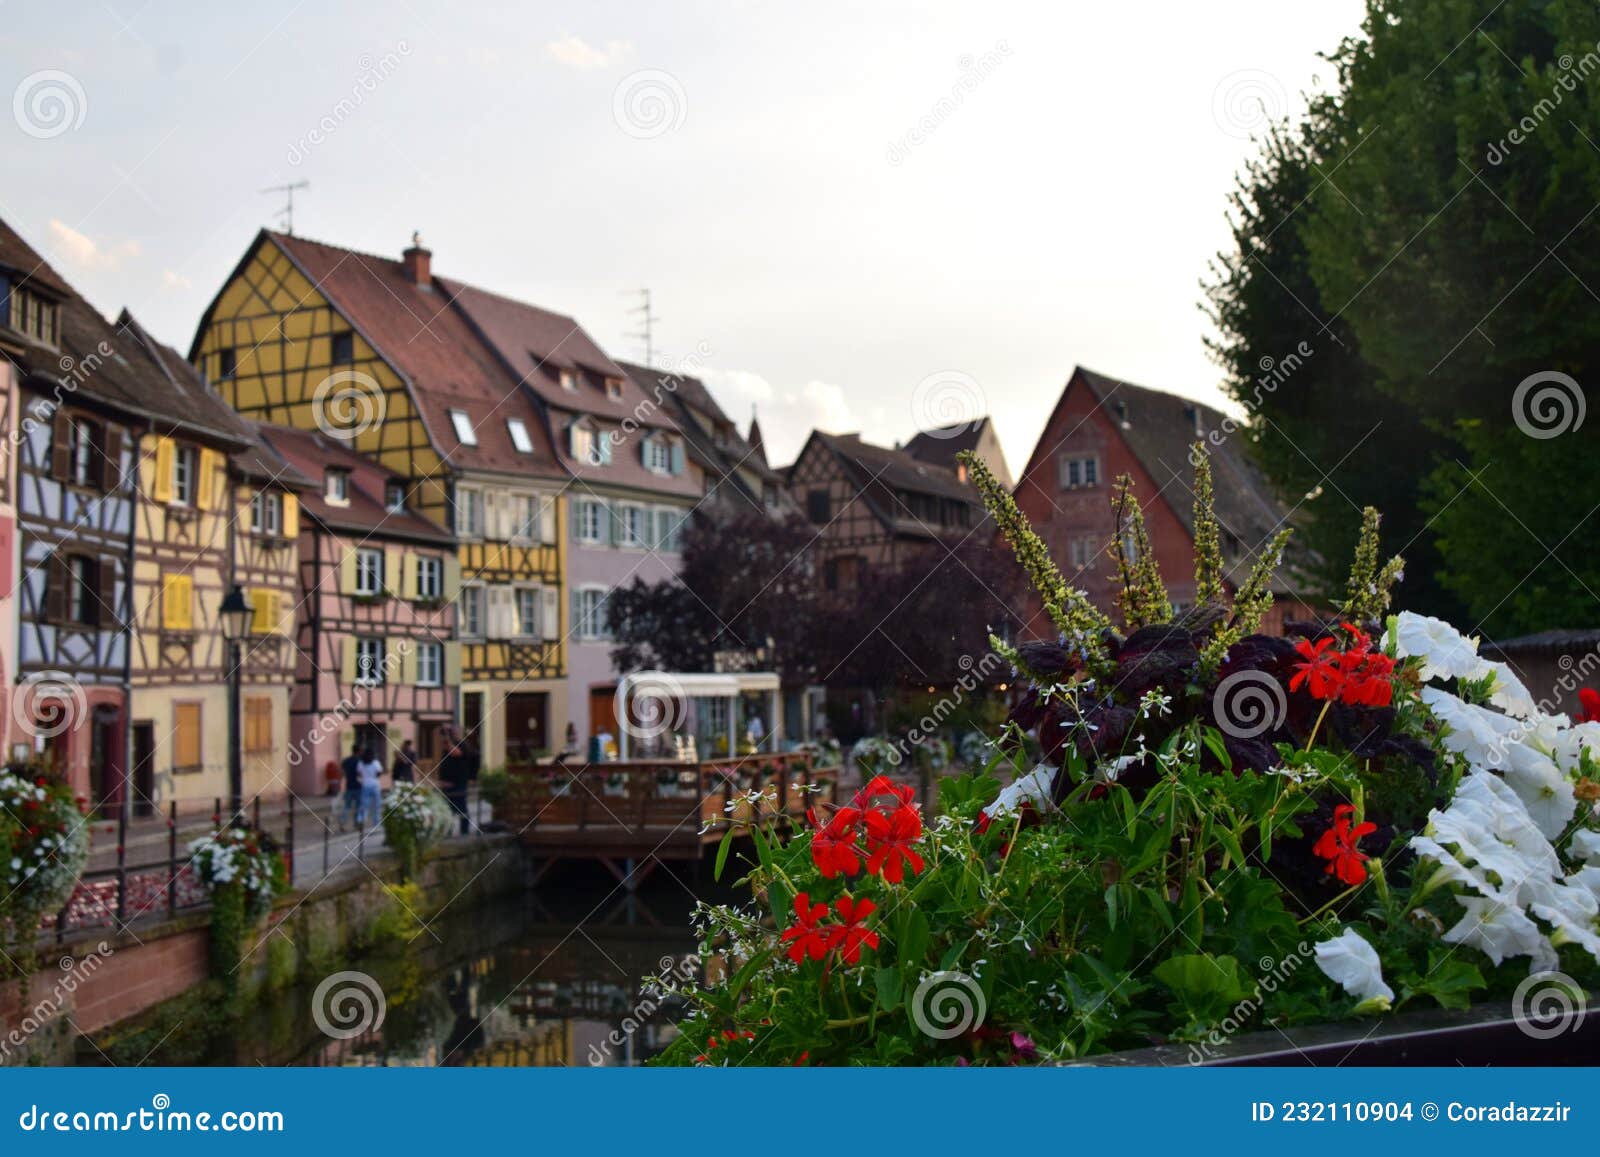 colors and architecture in colmar